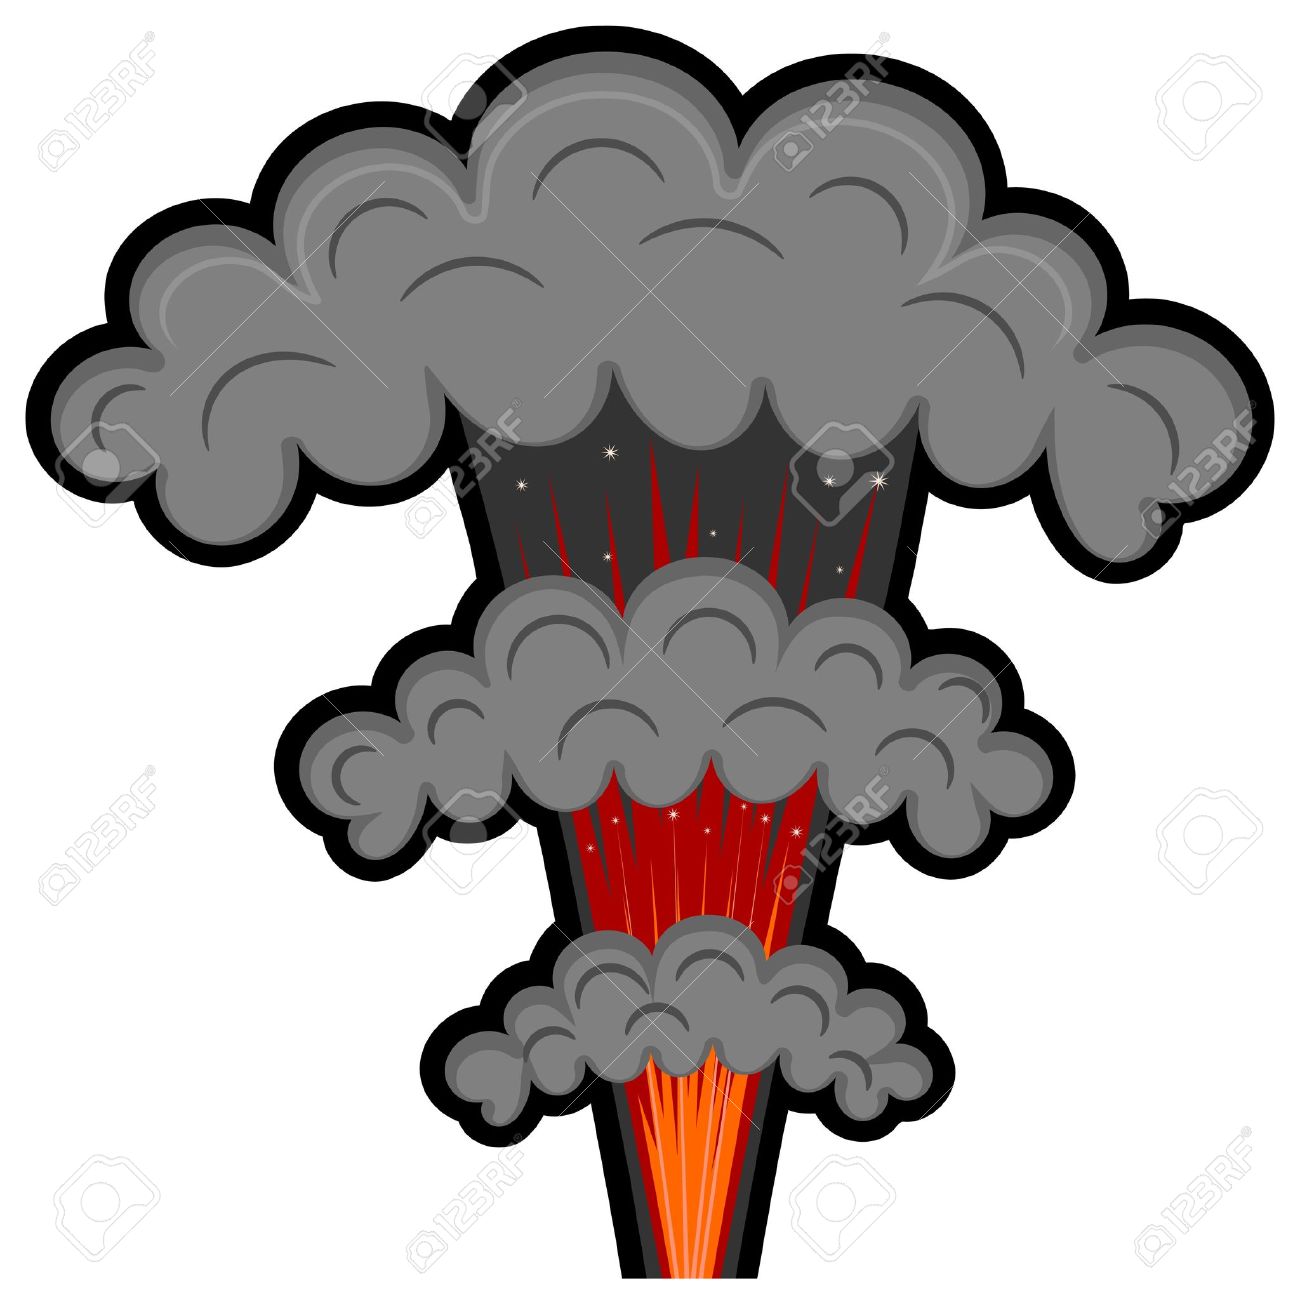 Explosions clipart free.